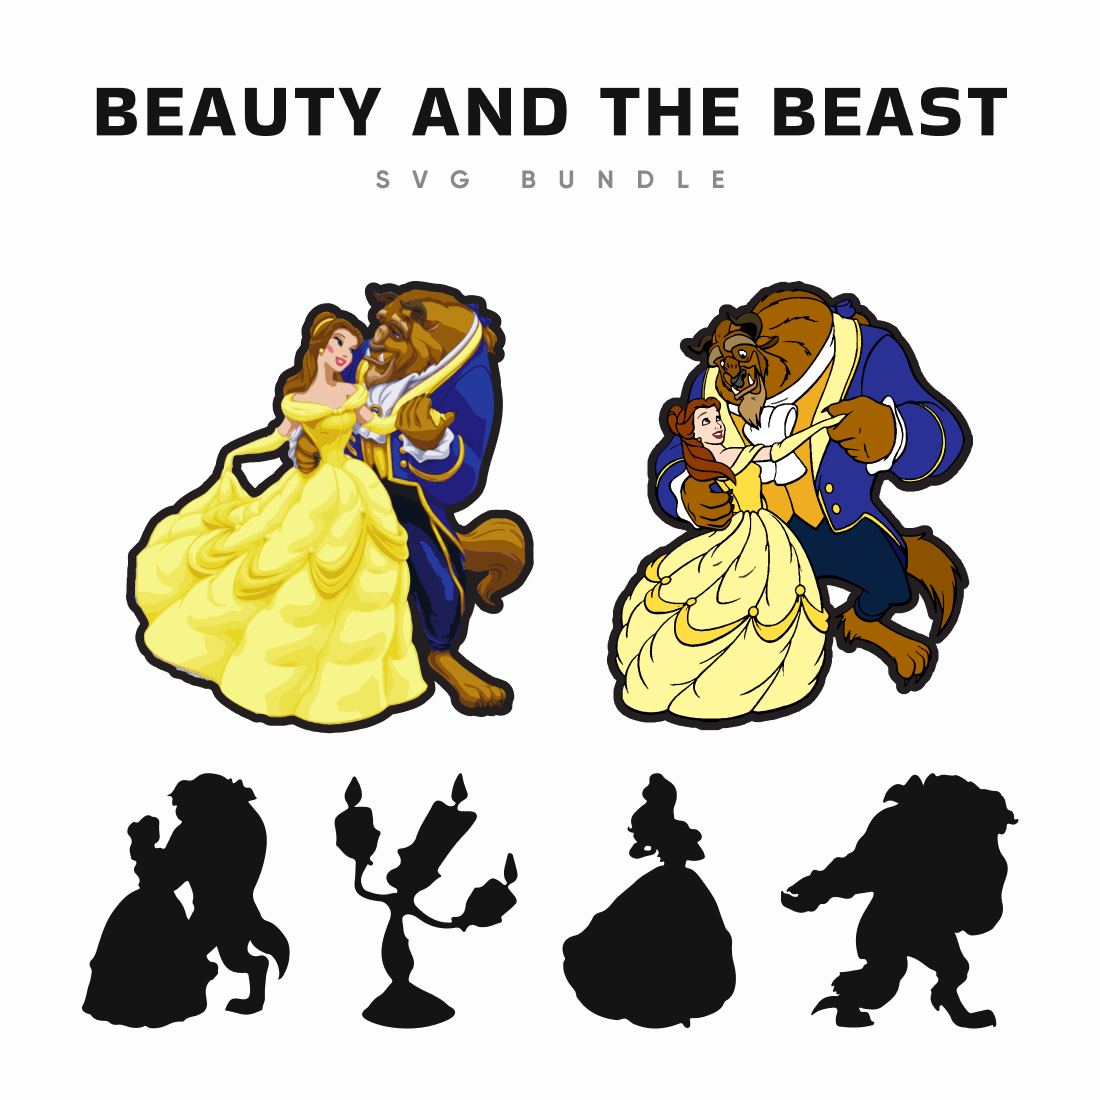 Beauty and the Beast SVG Files cover image.